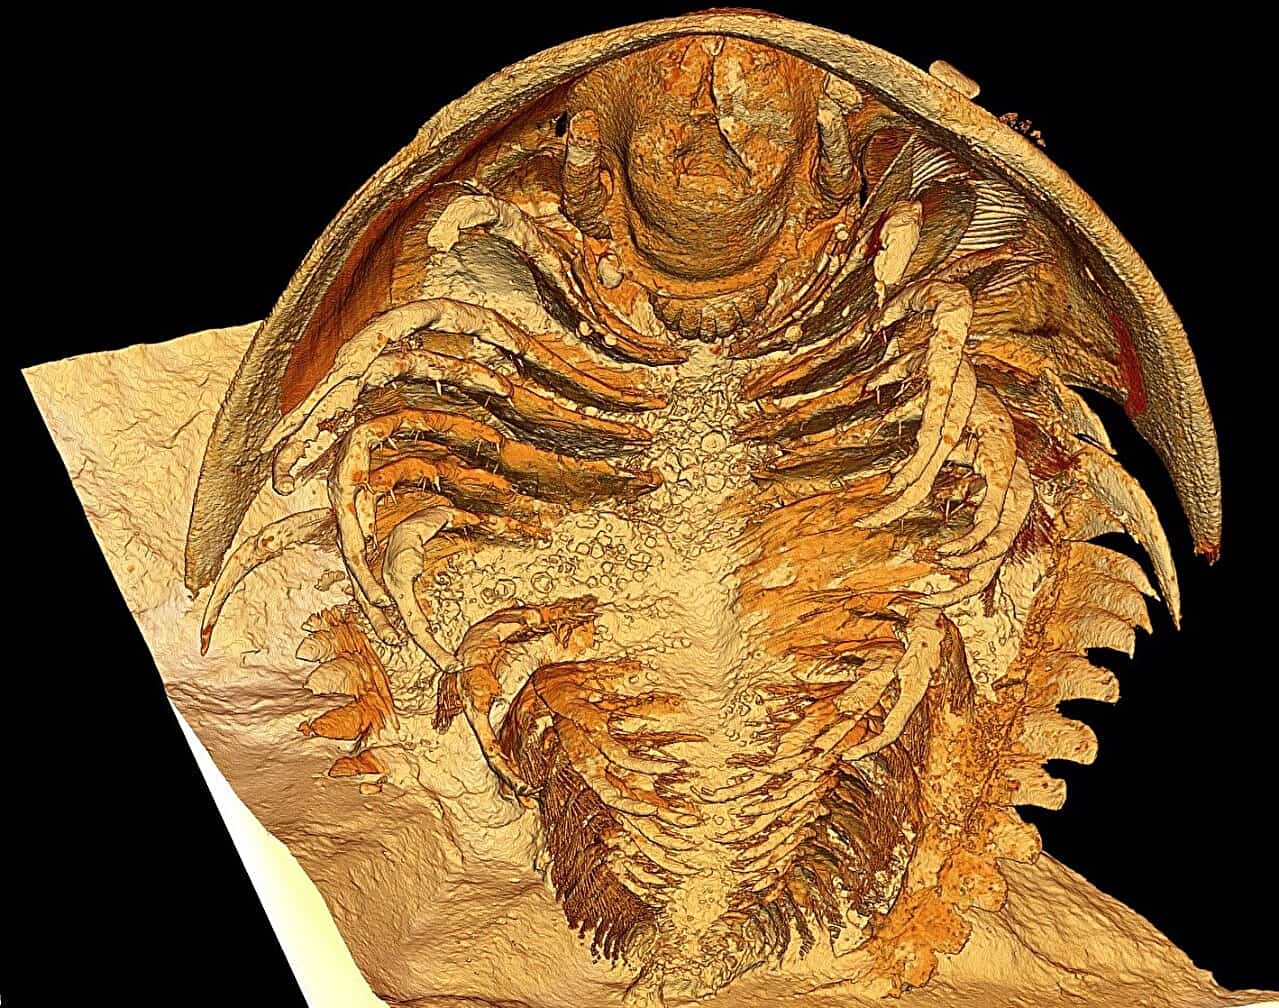 Trilobite treasures: exquisite fossils are remarkably well preserved [Video]